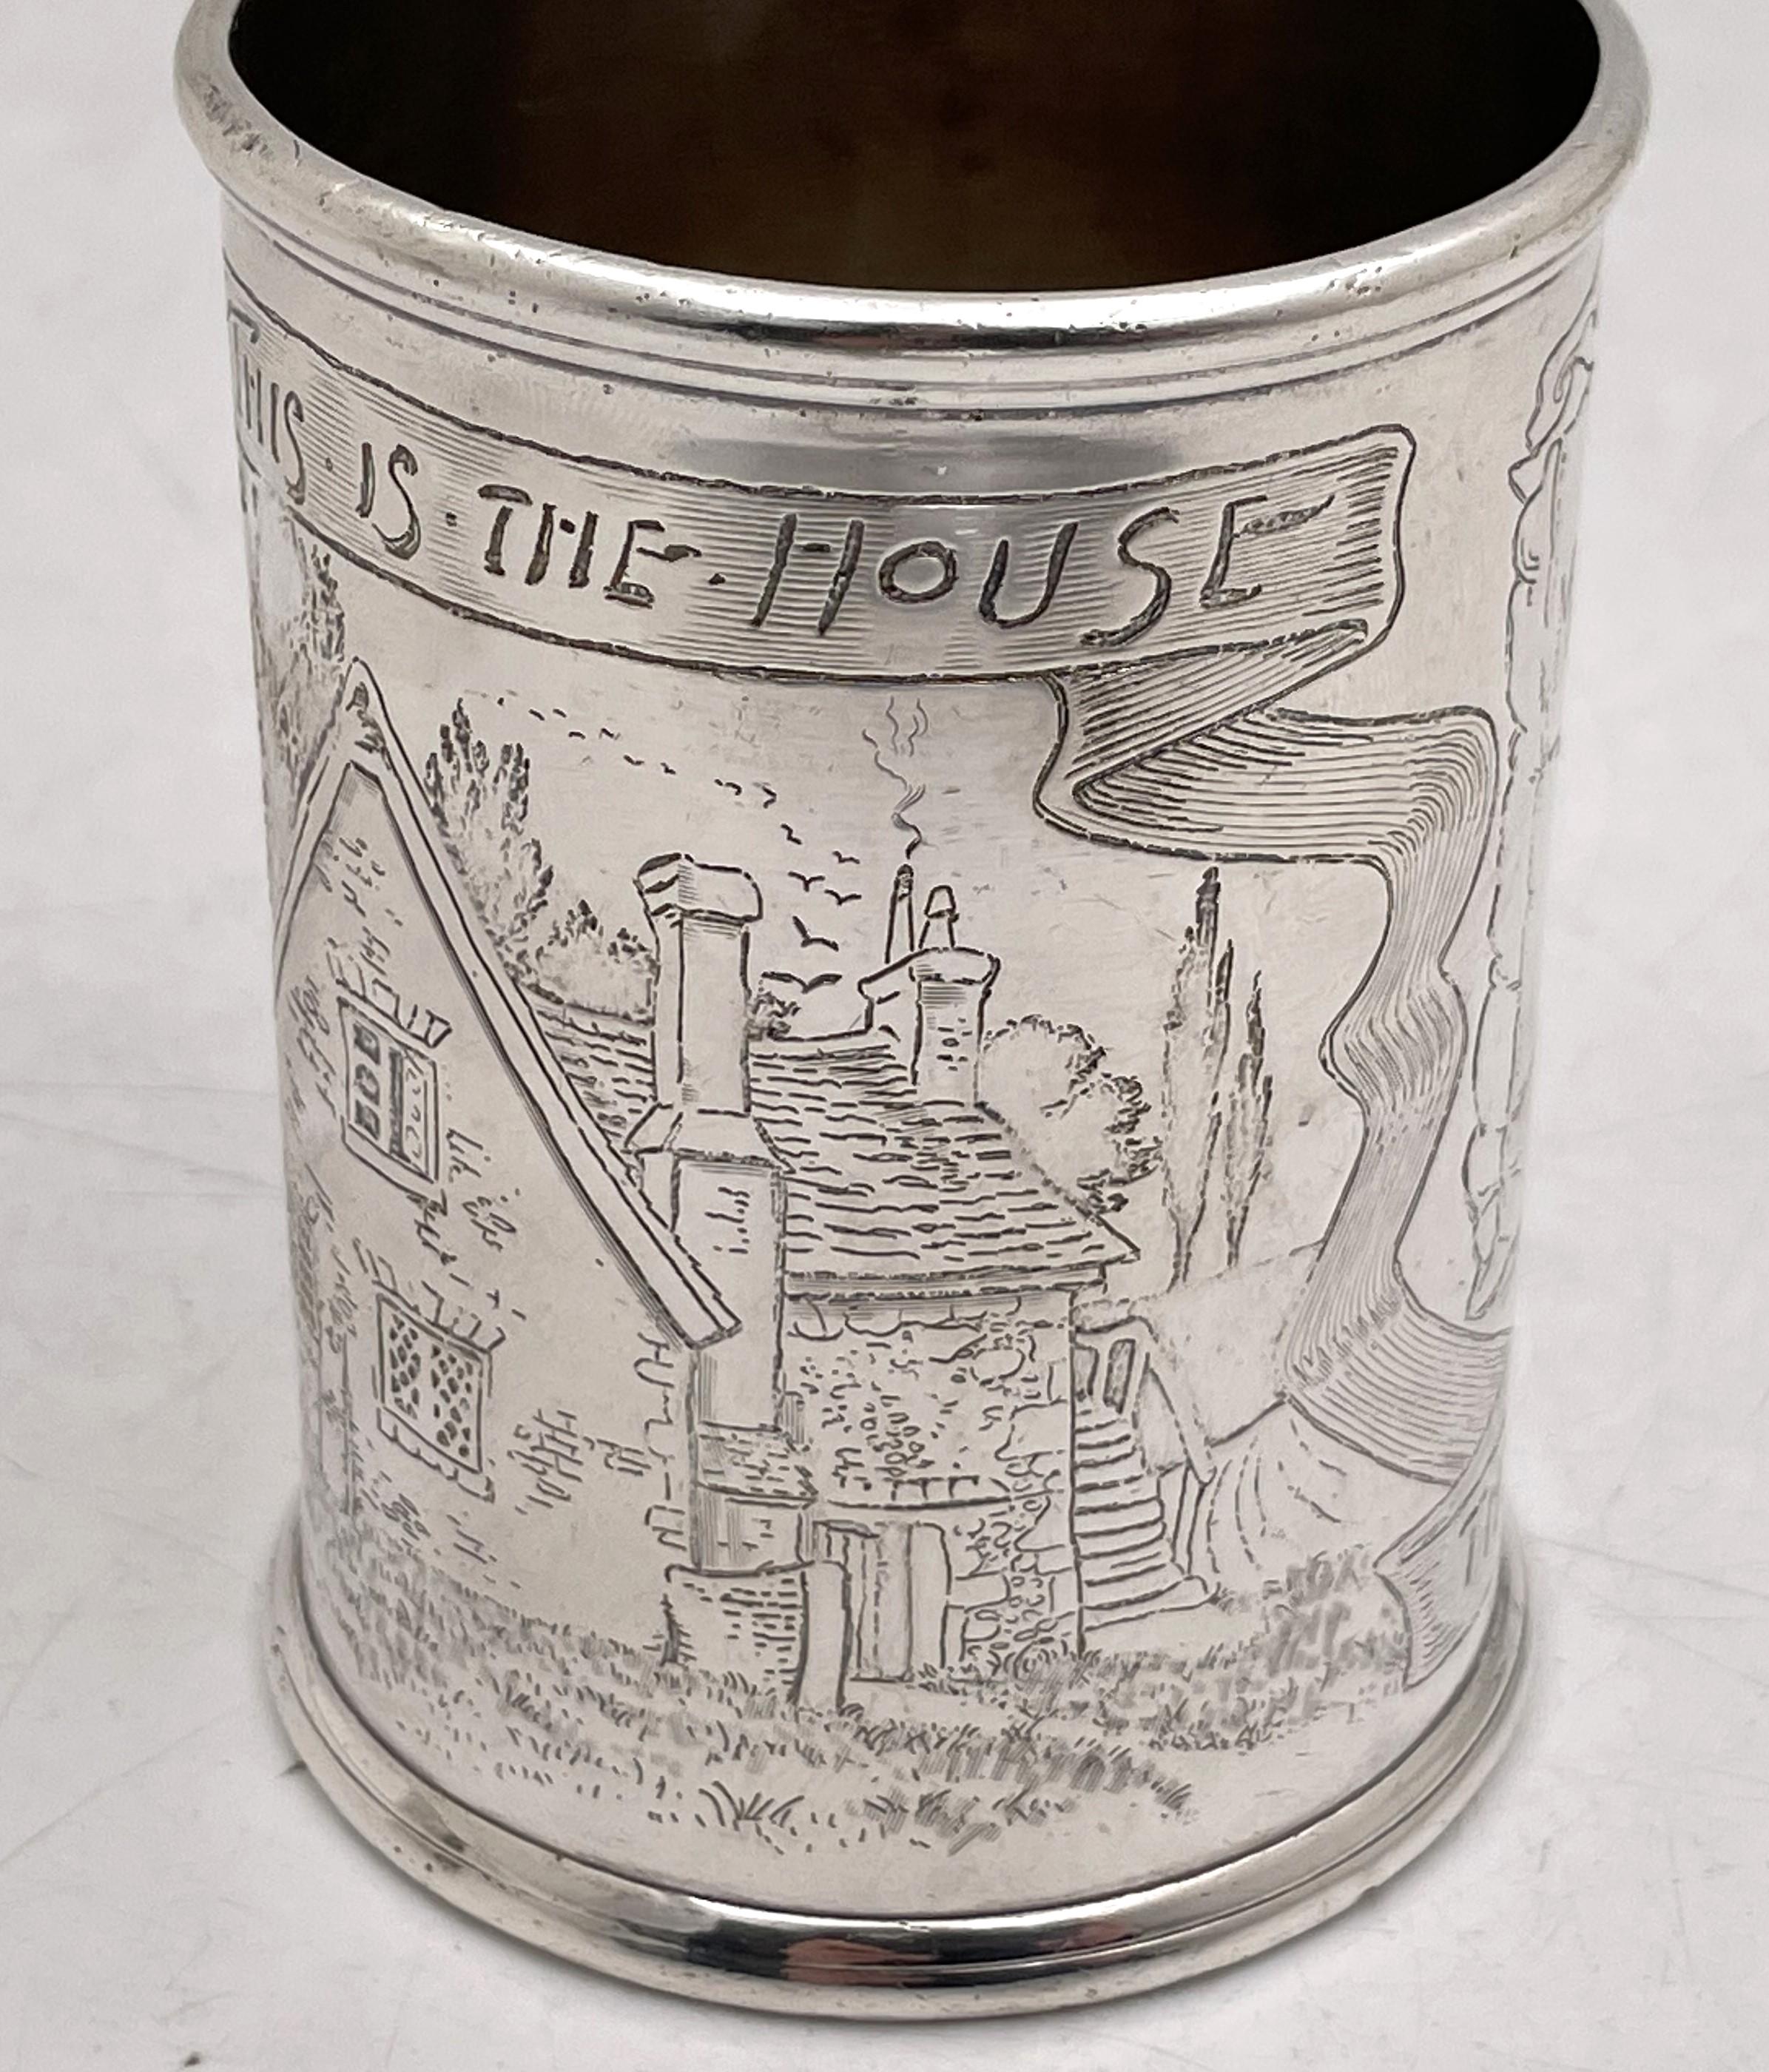 Mappin, sterling silver child's or christening mug or cup, beautifully adorned with acid-etched motifs depicting a house and a mouse, made in London in 1898. It measures 3 1/8'' in height by 2 1/4'' in diameter at the top, weighs 5.4 troy ounces,